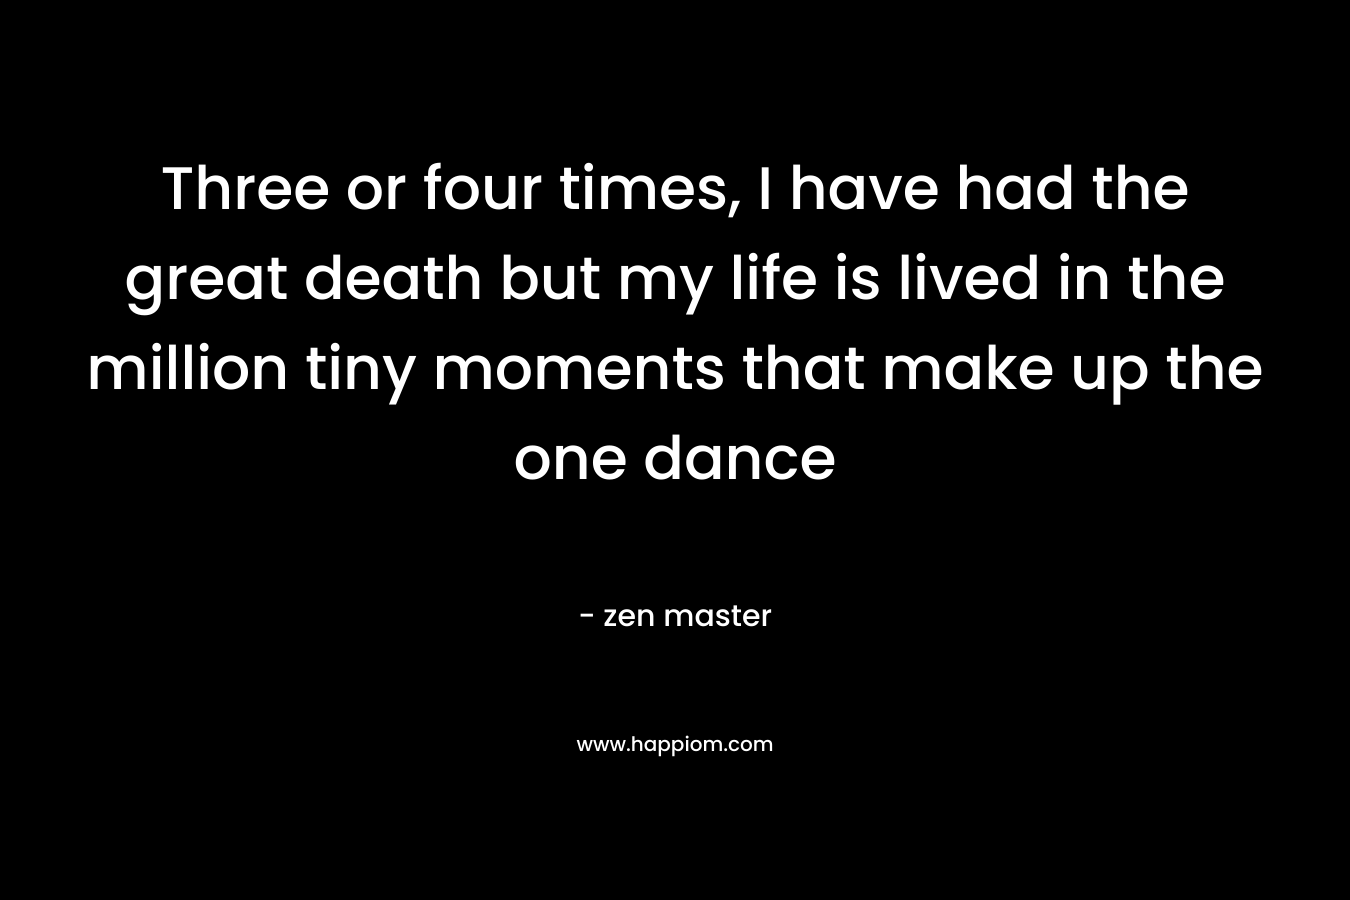 Three or four times, I have had the great death but my life is lived in the million tiny moments that make up the one dance